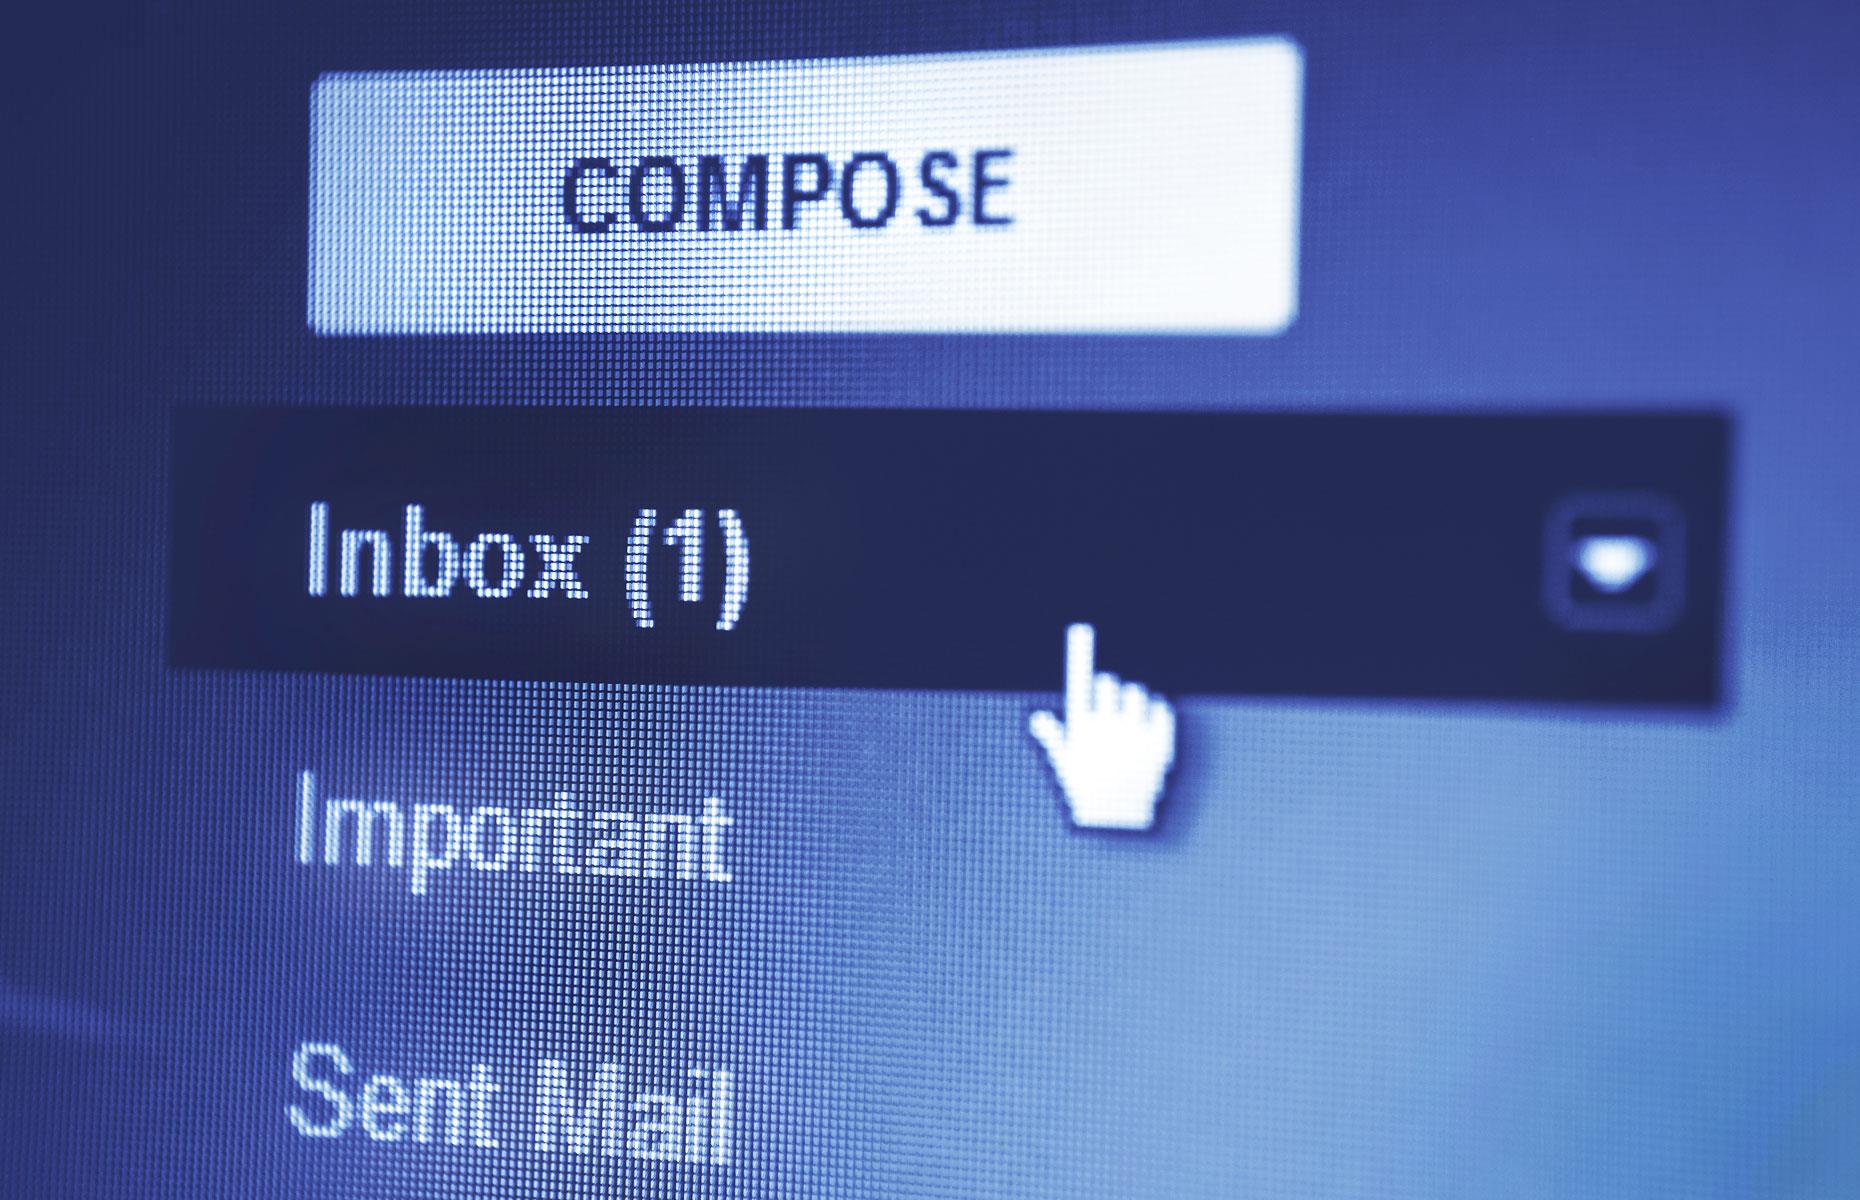 Unused email software subscription: $12 million